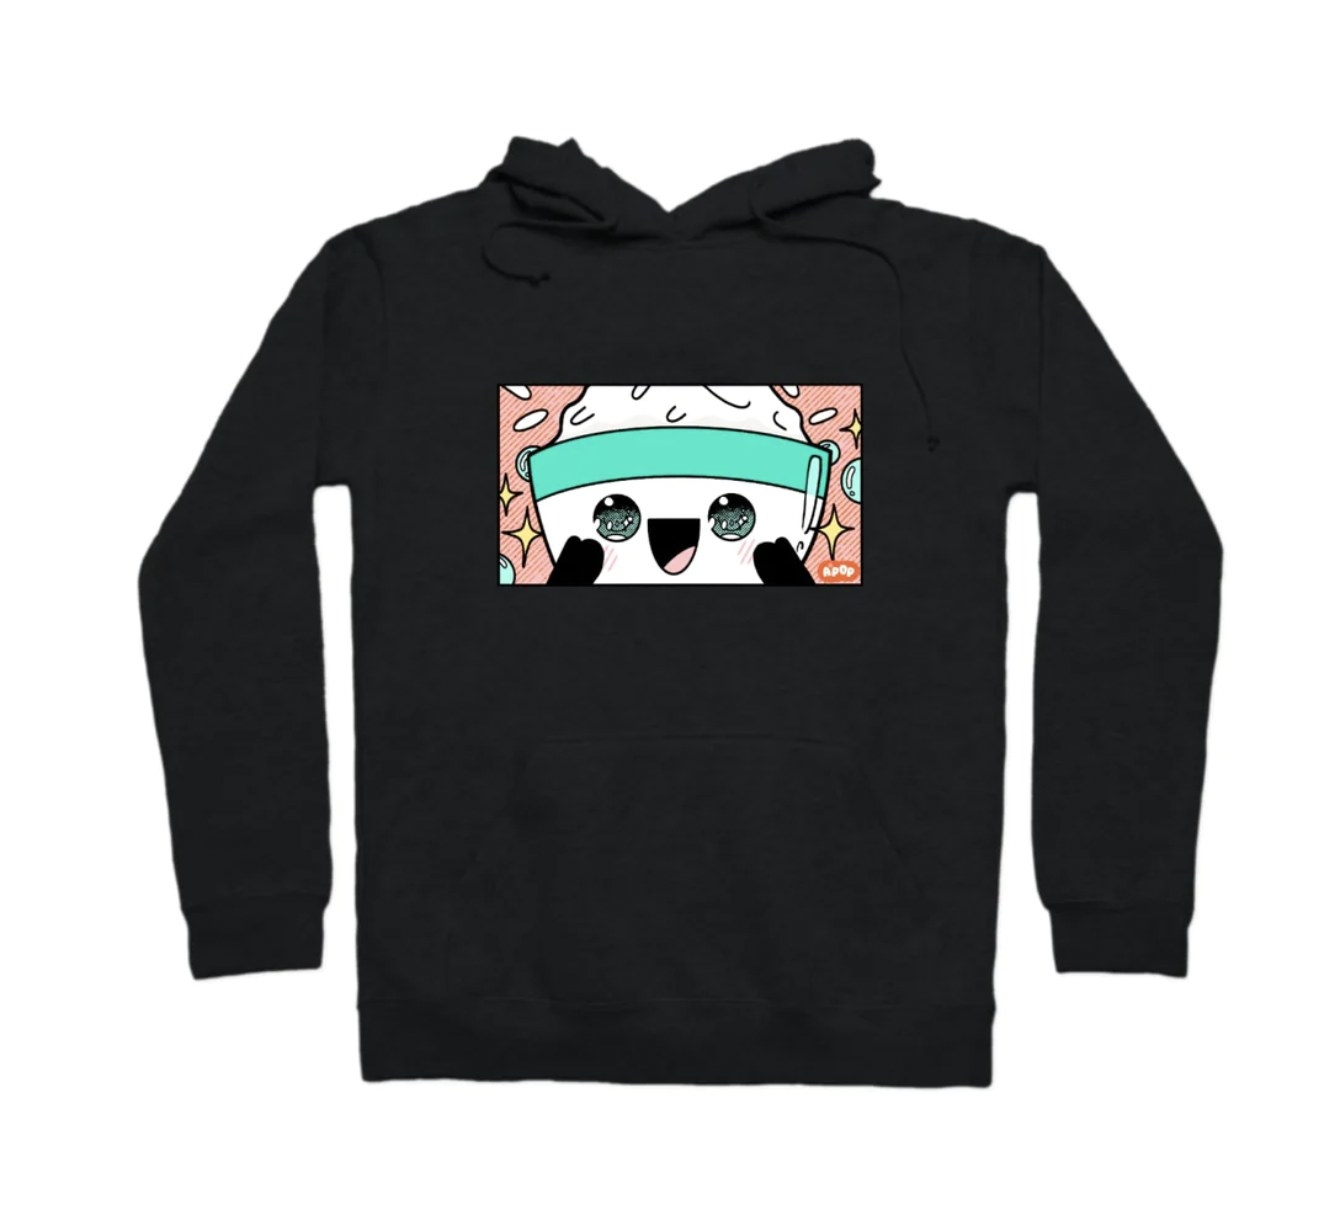 the black pullover hoodie with smiley ricebowl design